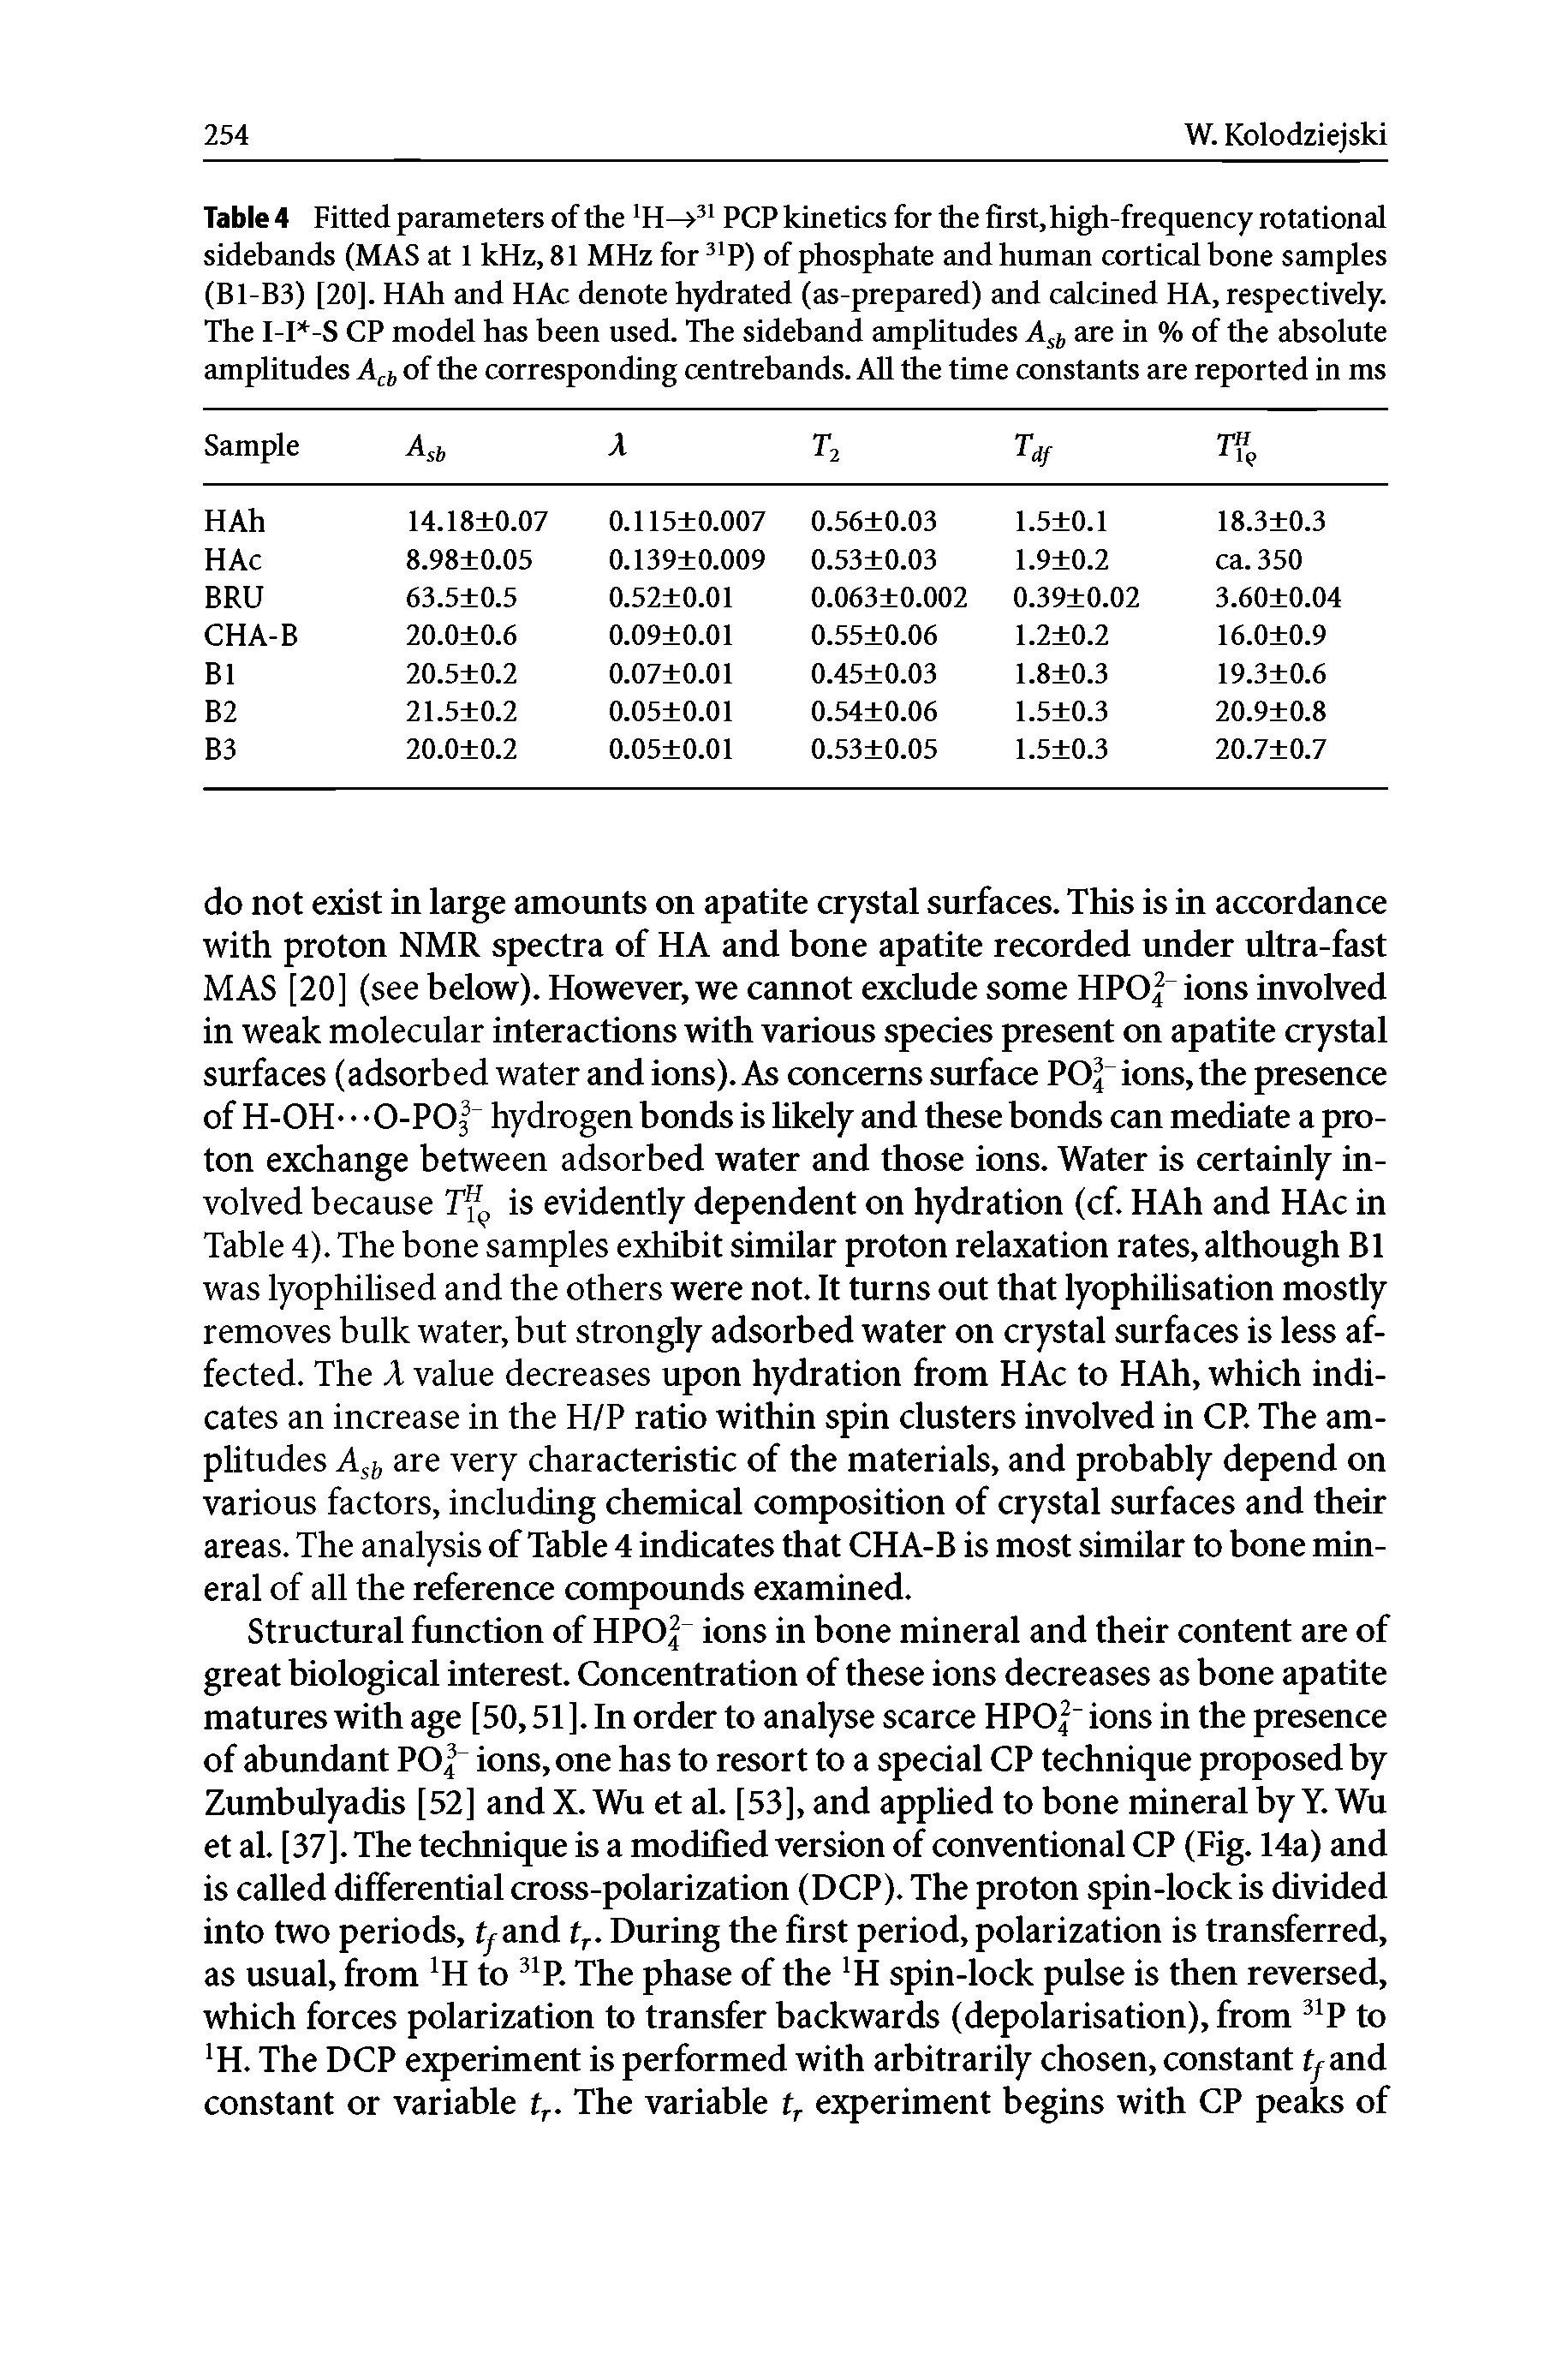 Table 4 Fitted parameters of the H—PCP kinetics for the first, high-frequency rotational sidebands (MAS at 1 kHz, 81 MHz for P) of phosphate and human cortical hone samples (B1-B3) [20]. HAh and HAc denote hydrated (as-prepared) and calcined HA, respectively. The I-H-S CP model has heen used. The sideband amphtudes Ajj are in % of the absolute amplitudes A j of the corresponding centrebands. AH the time constants are reported in ms...